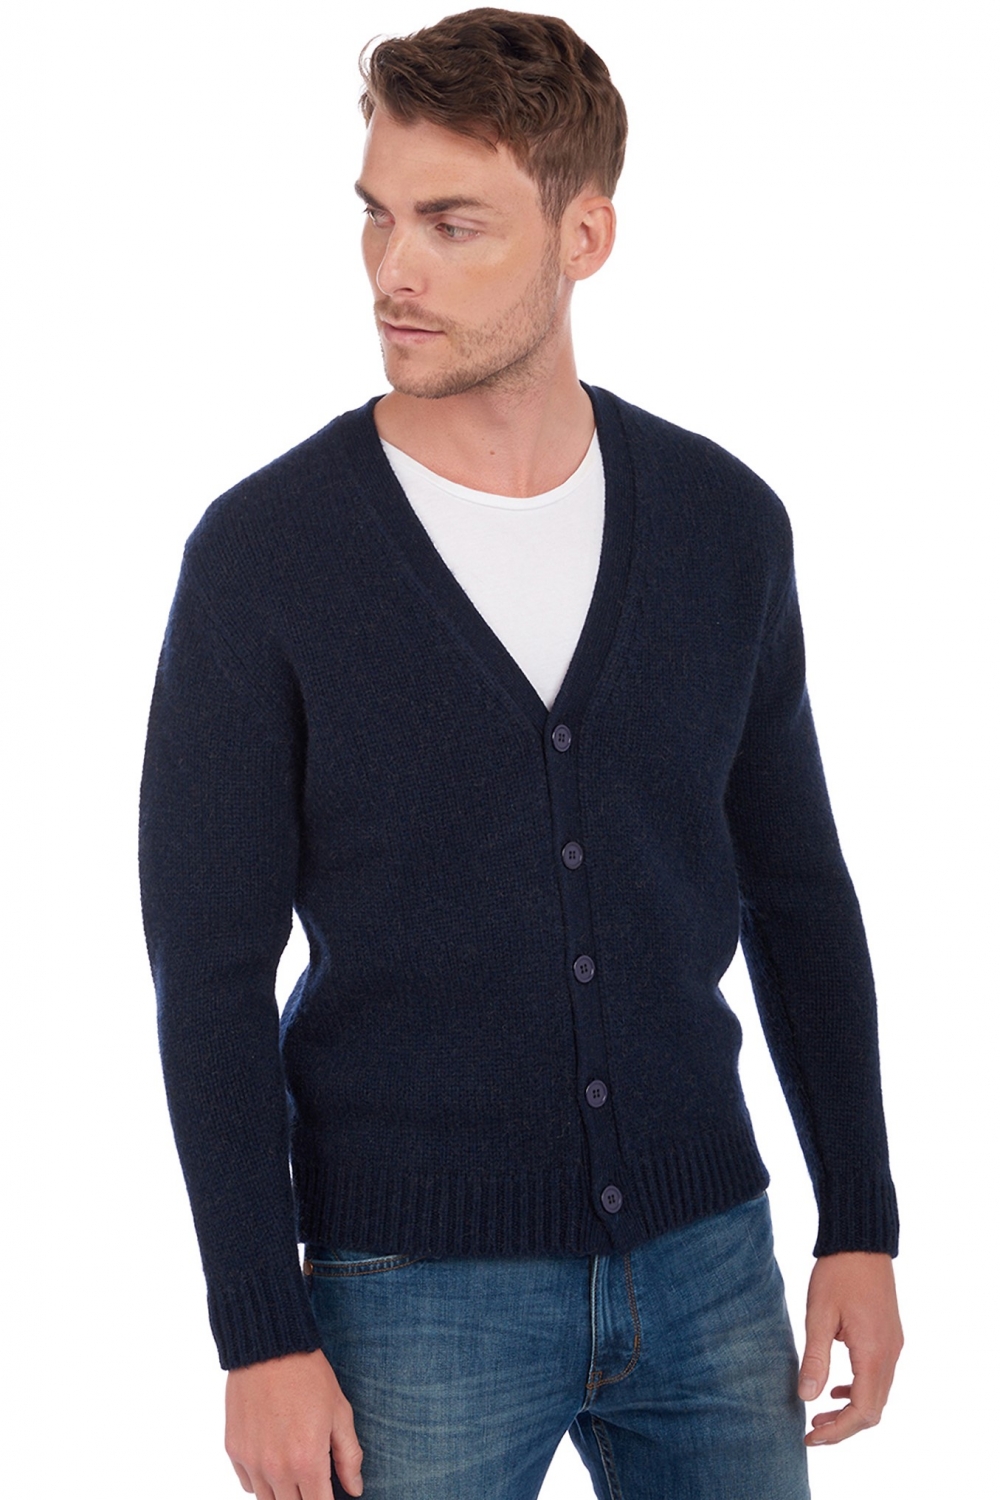 Chameau pull homme acton marine m